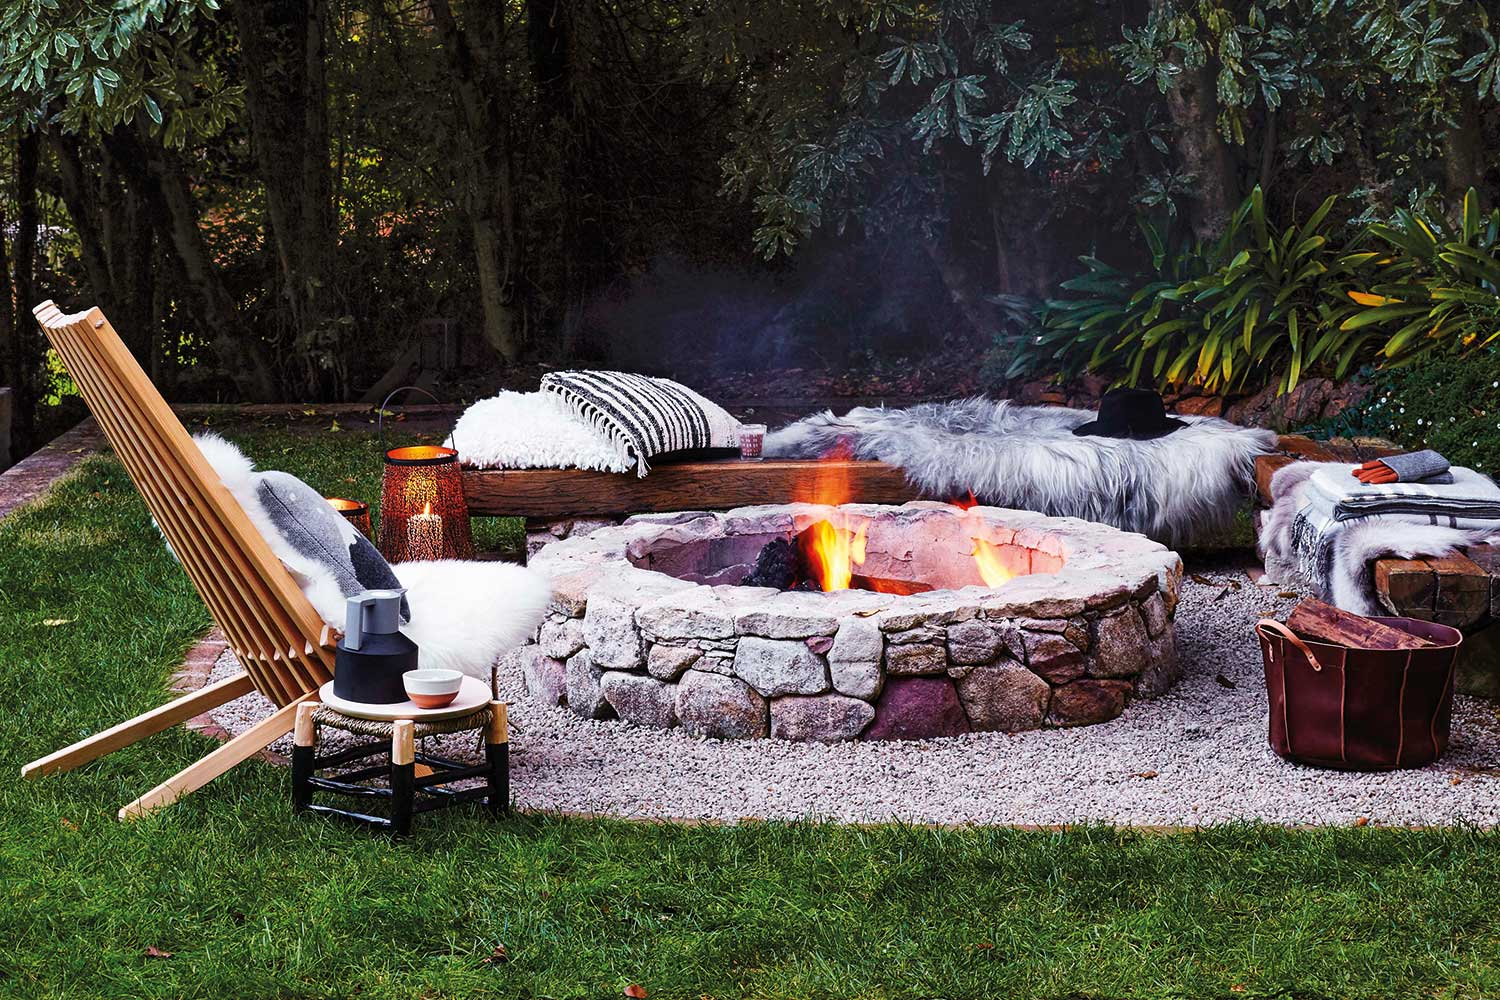 5 Things You Need To Know About Having A Fire Pit Home Beautiful intended for sizing 1500 X 1000